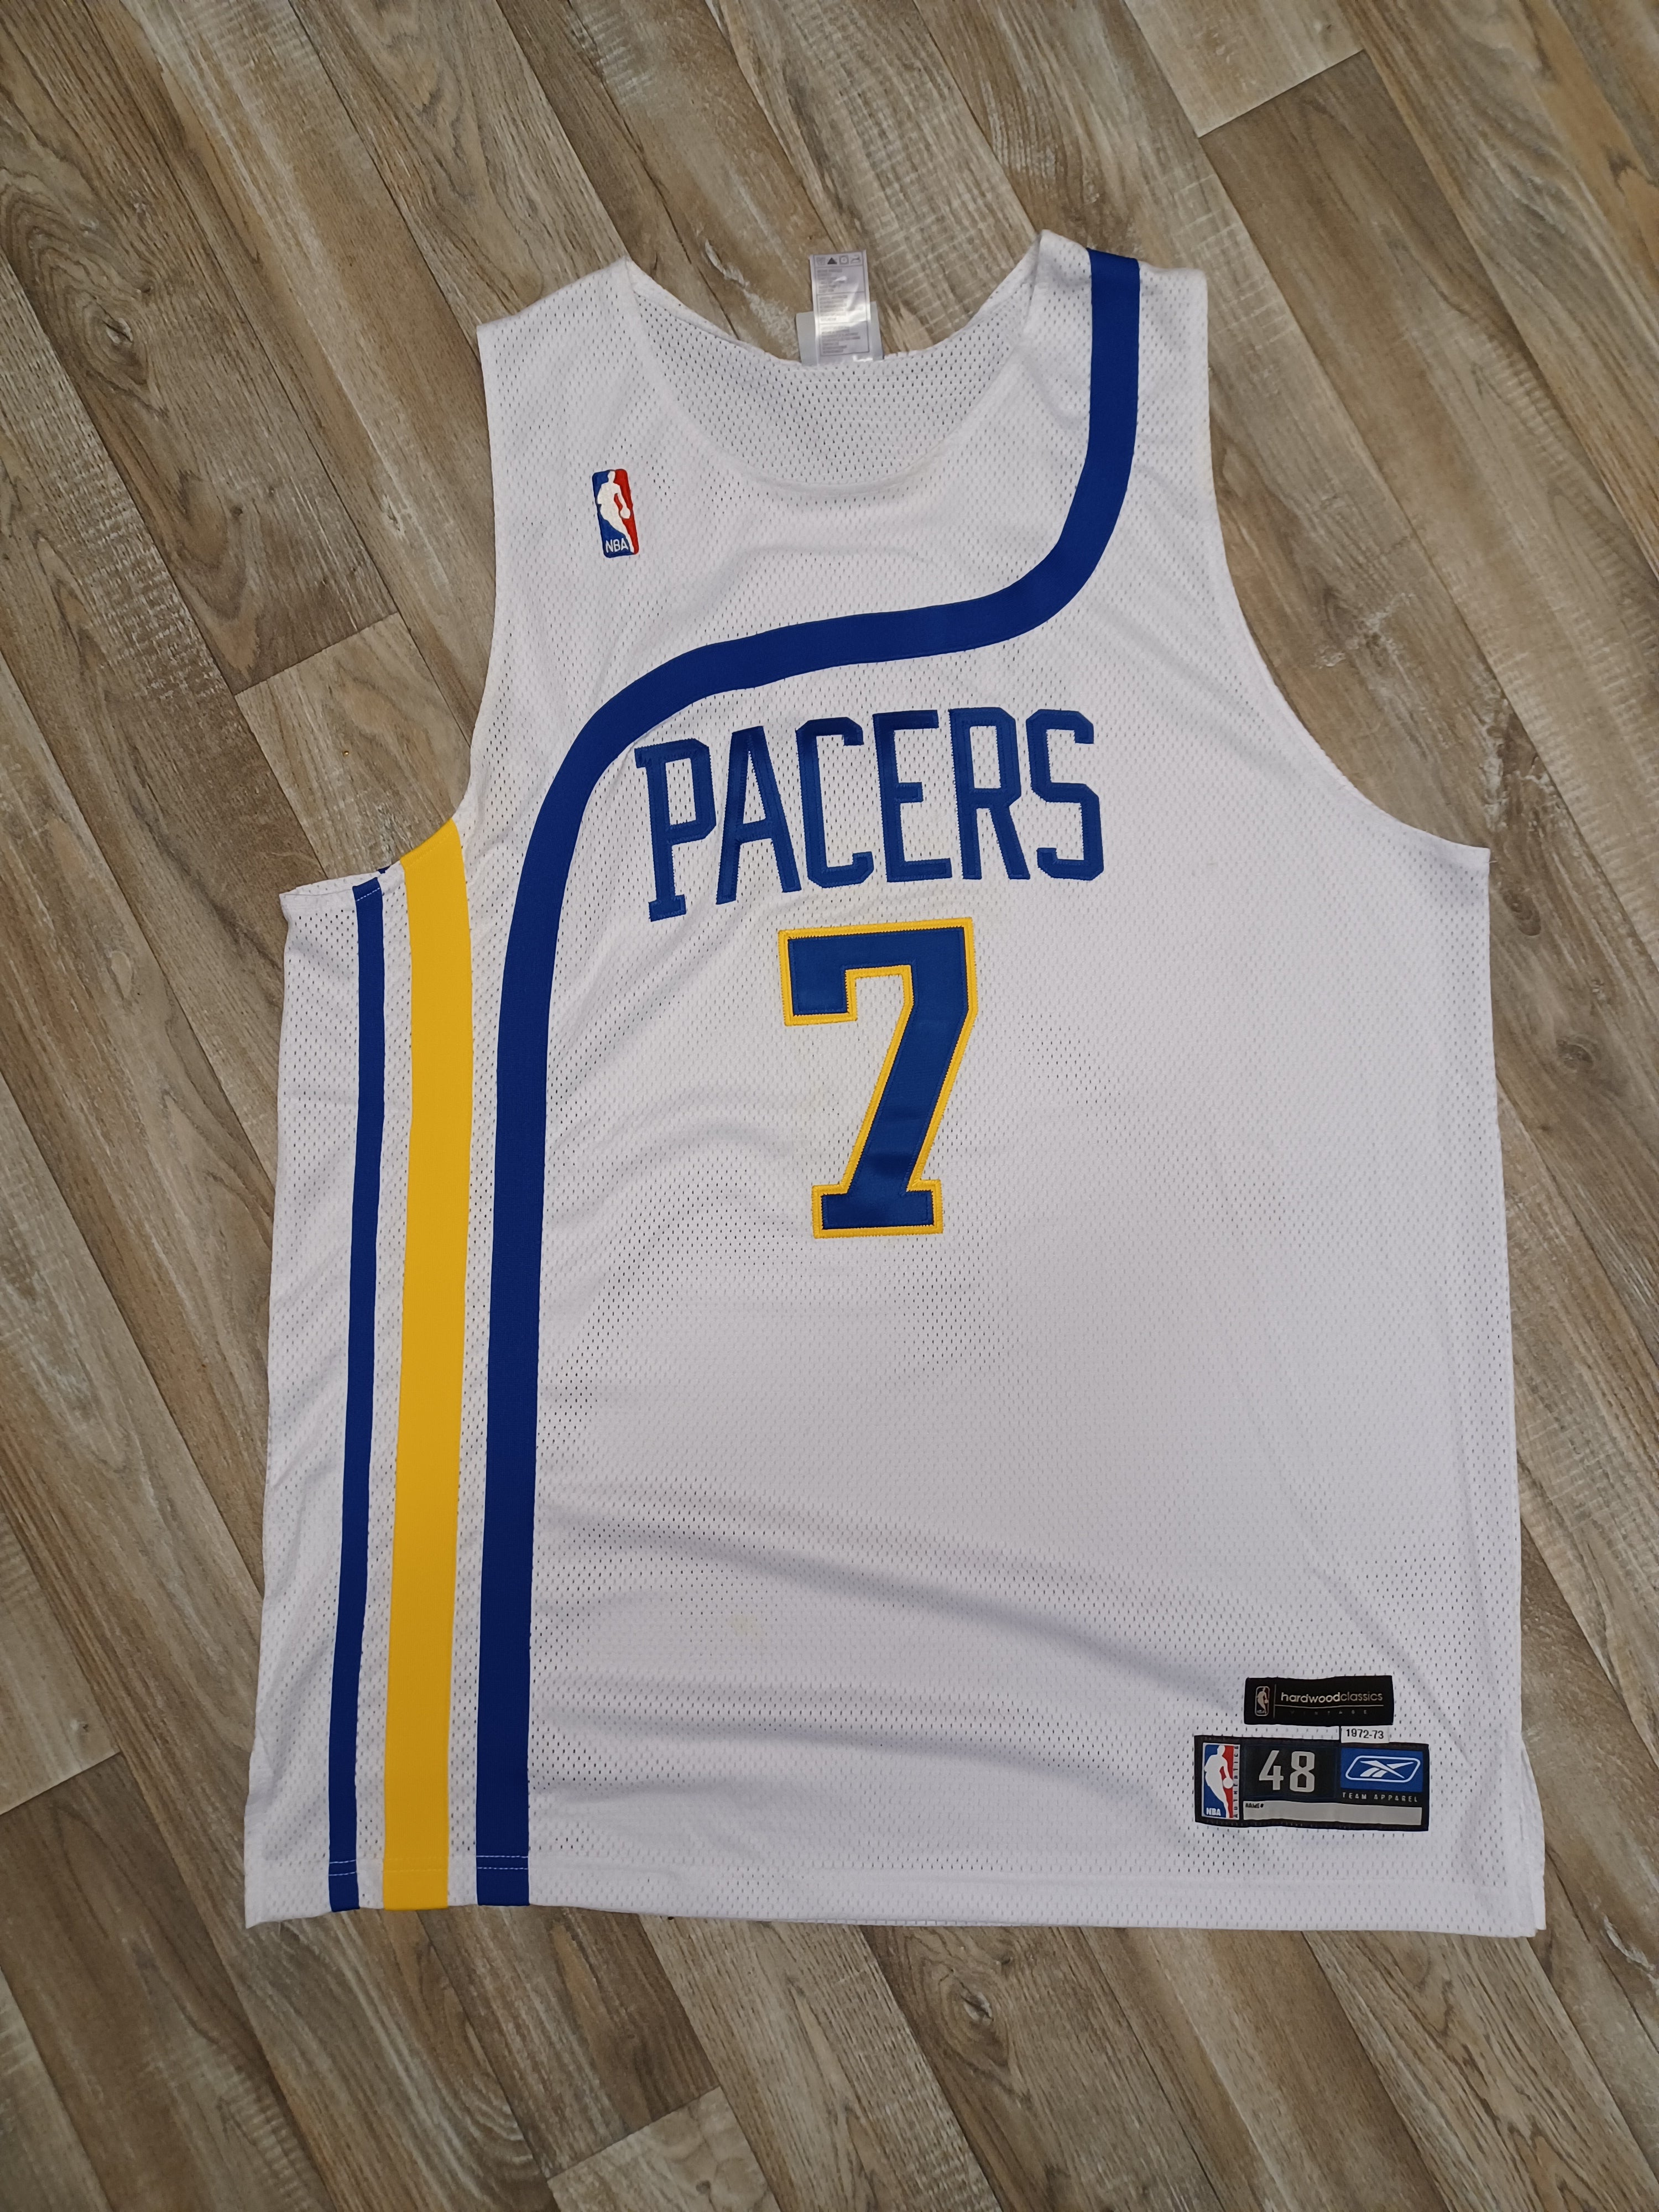 INDIANA PACERS Reebok NBA – Jermaine O'Neal #7 Vintage Jersey – Size: Small  (8)